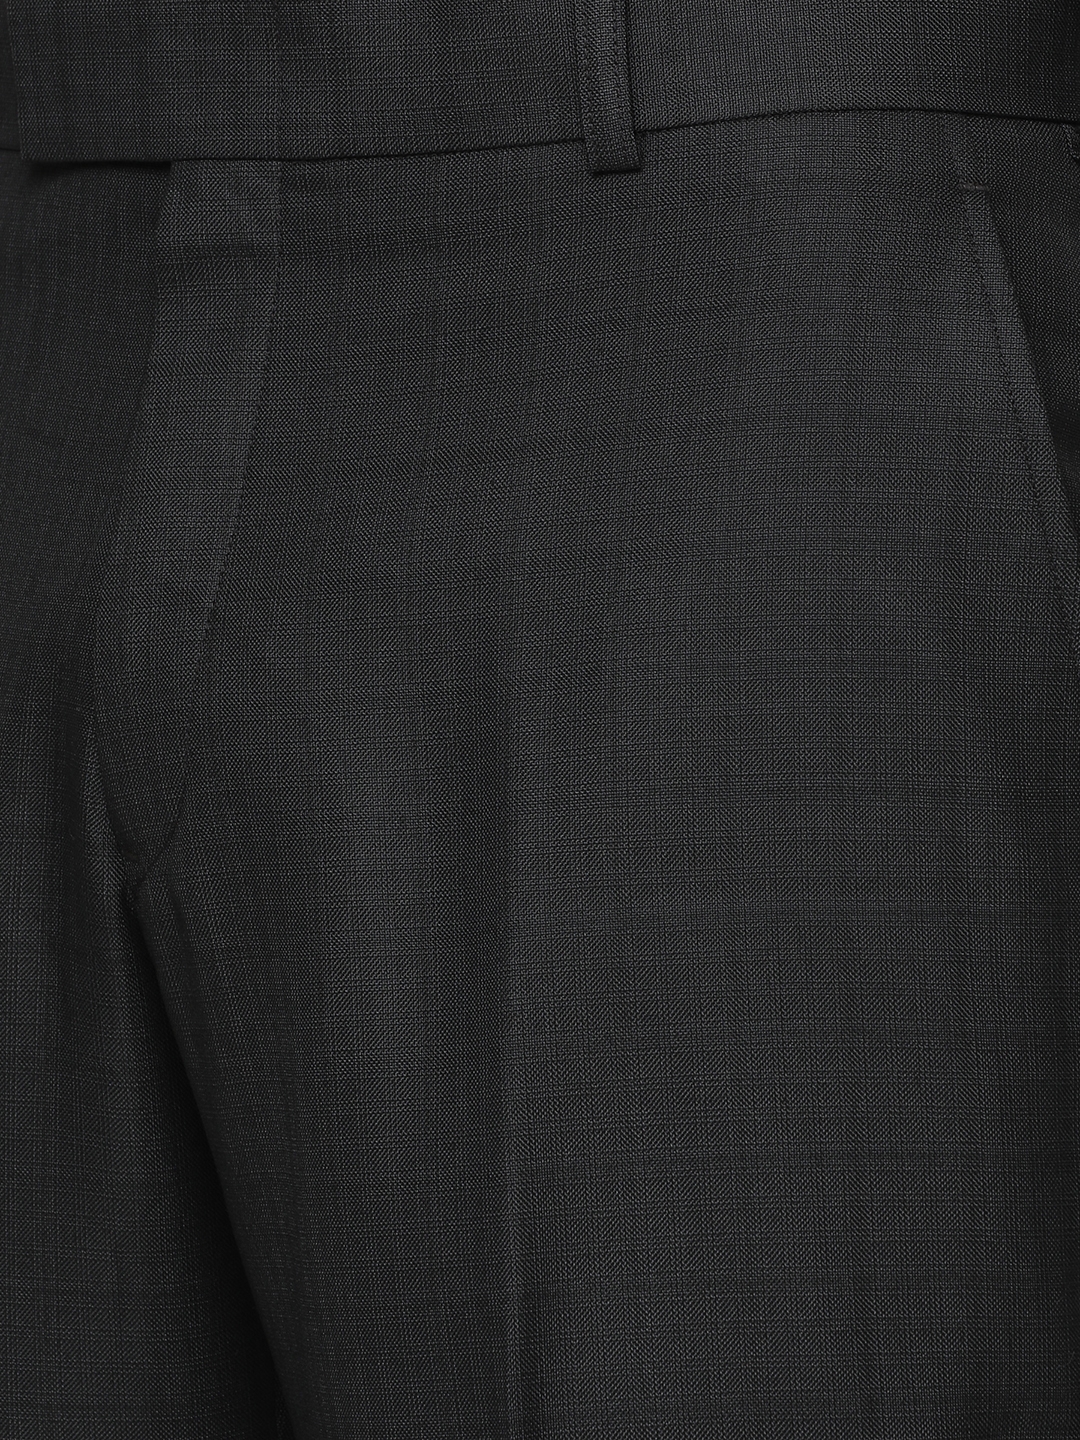 Black & Grey Checked Classic Fit Formal Trouser | Greenfibre